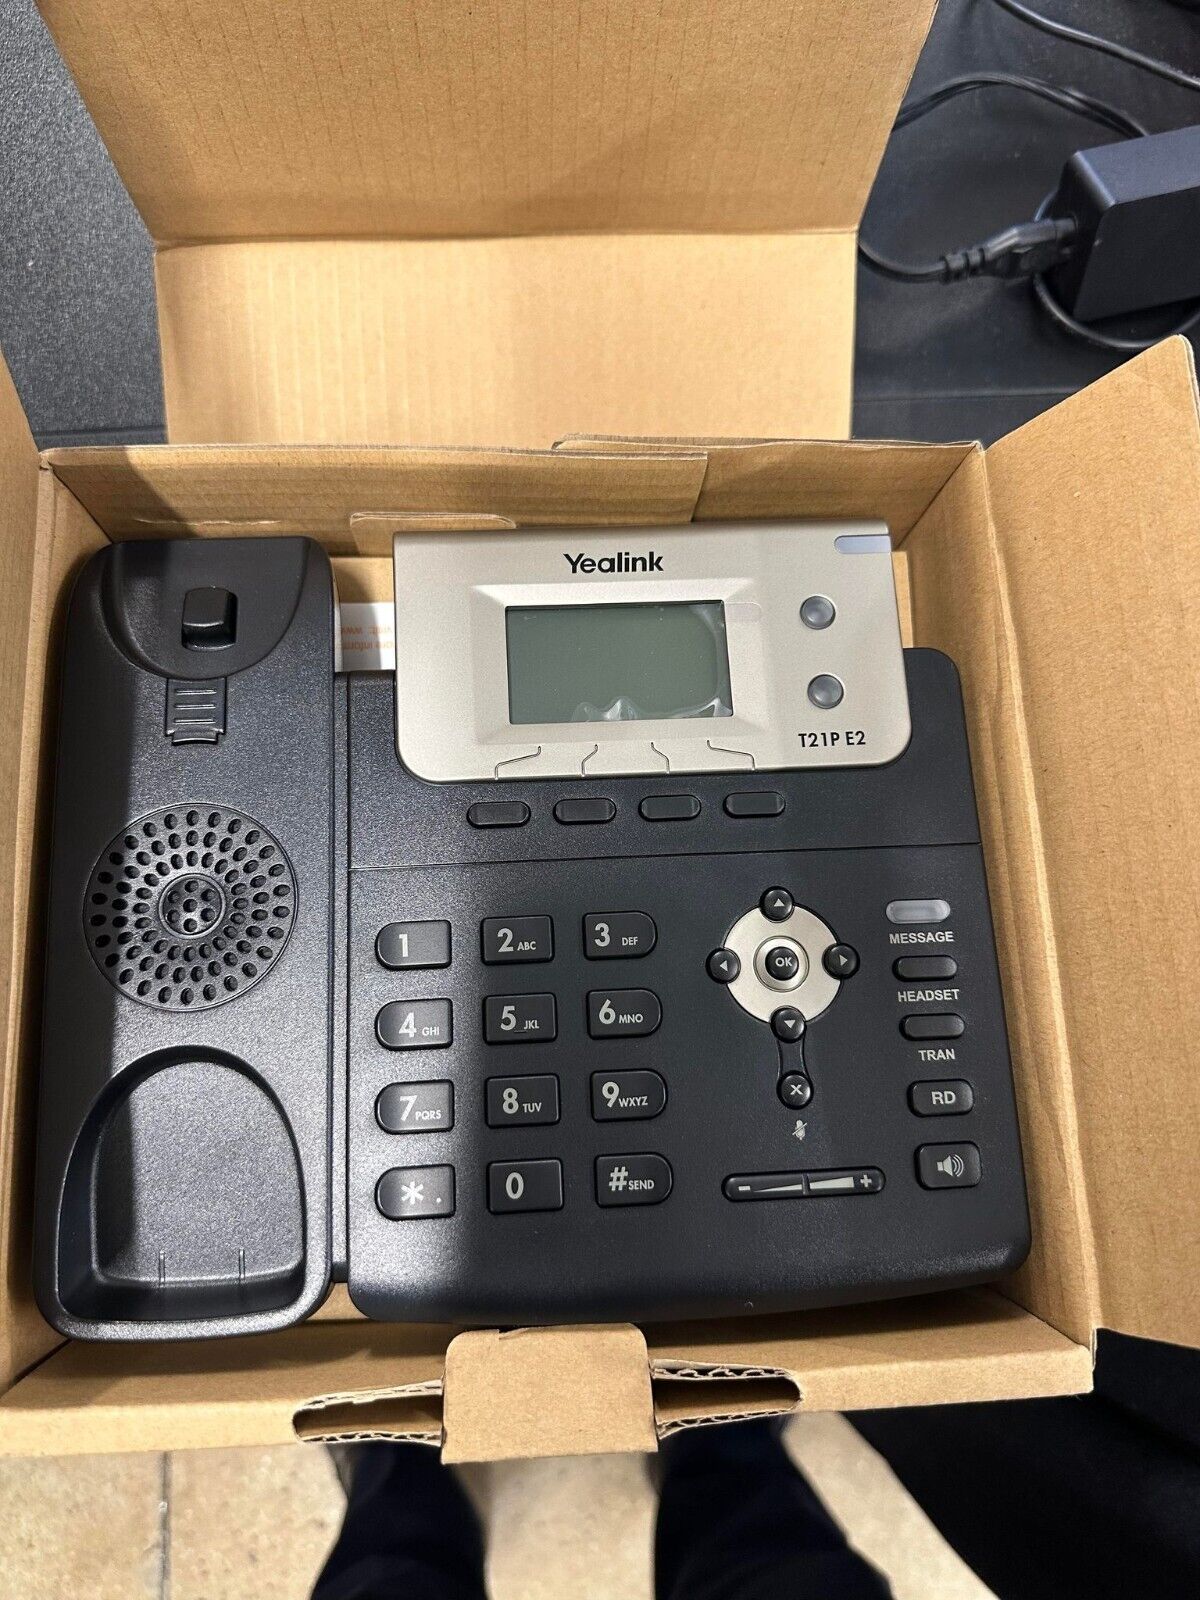 Yealink SIP-T21P E2  Dual-line Entry Level IP Phone